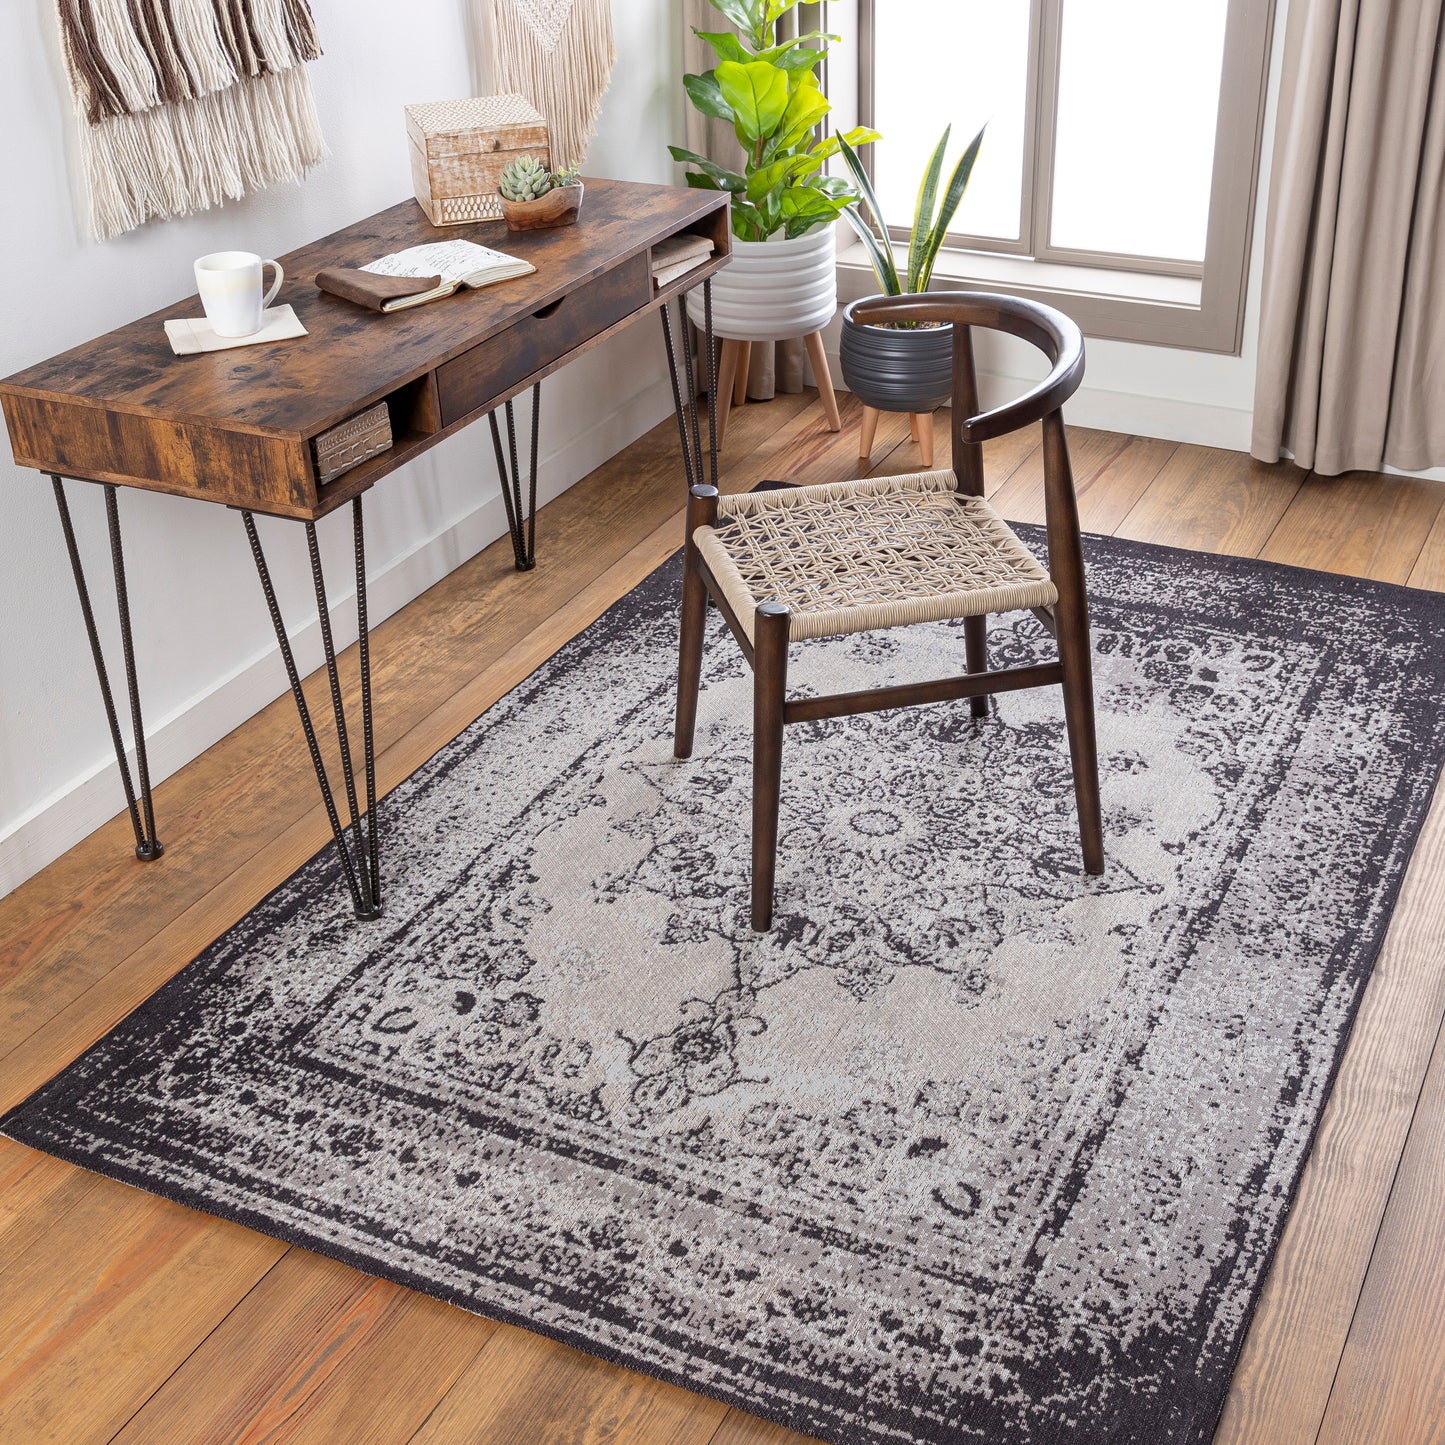 Amsterdam 26907 Hand Woven Synthetic Blend Indoor Area Rug by Surya Rugs